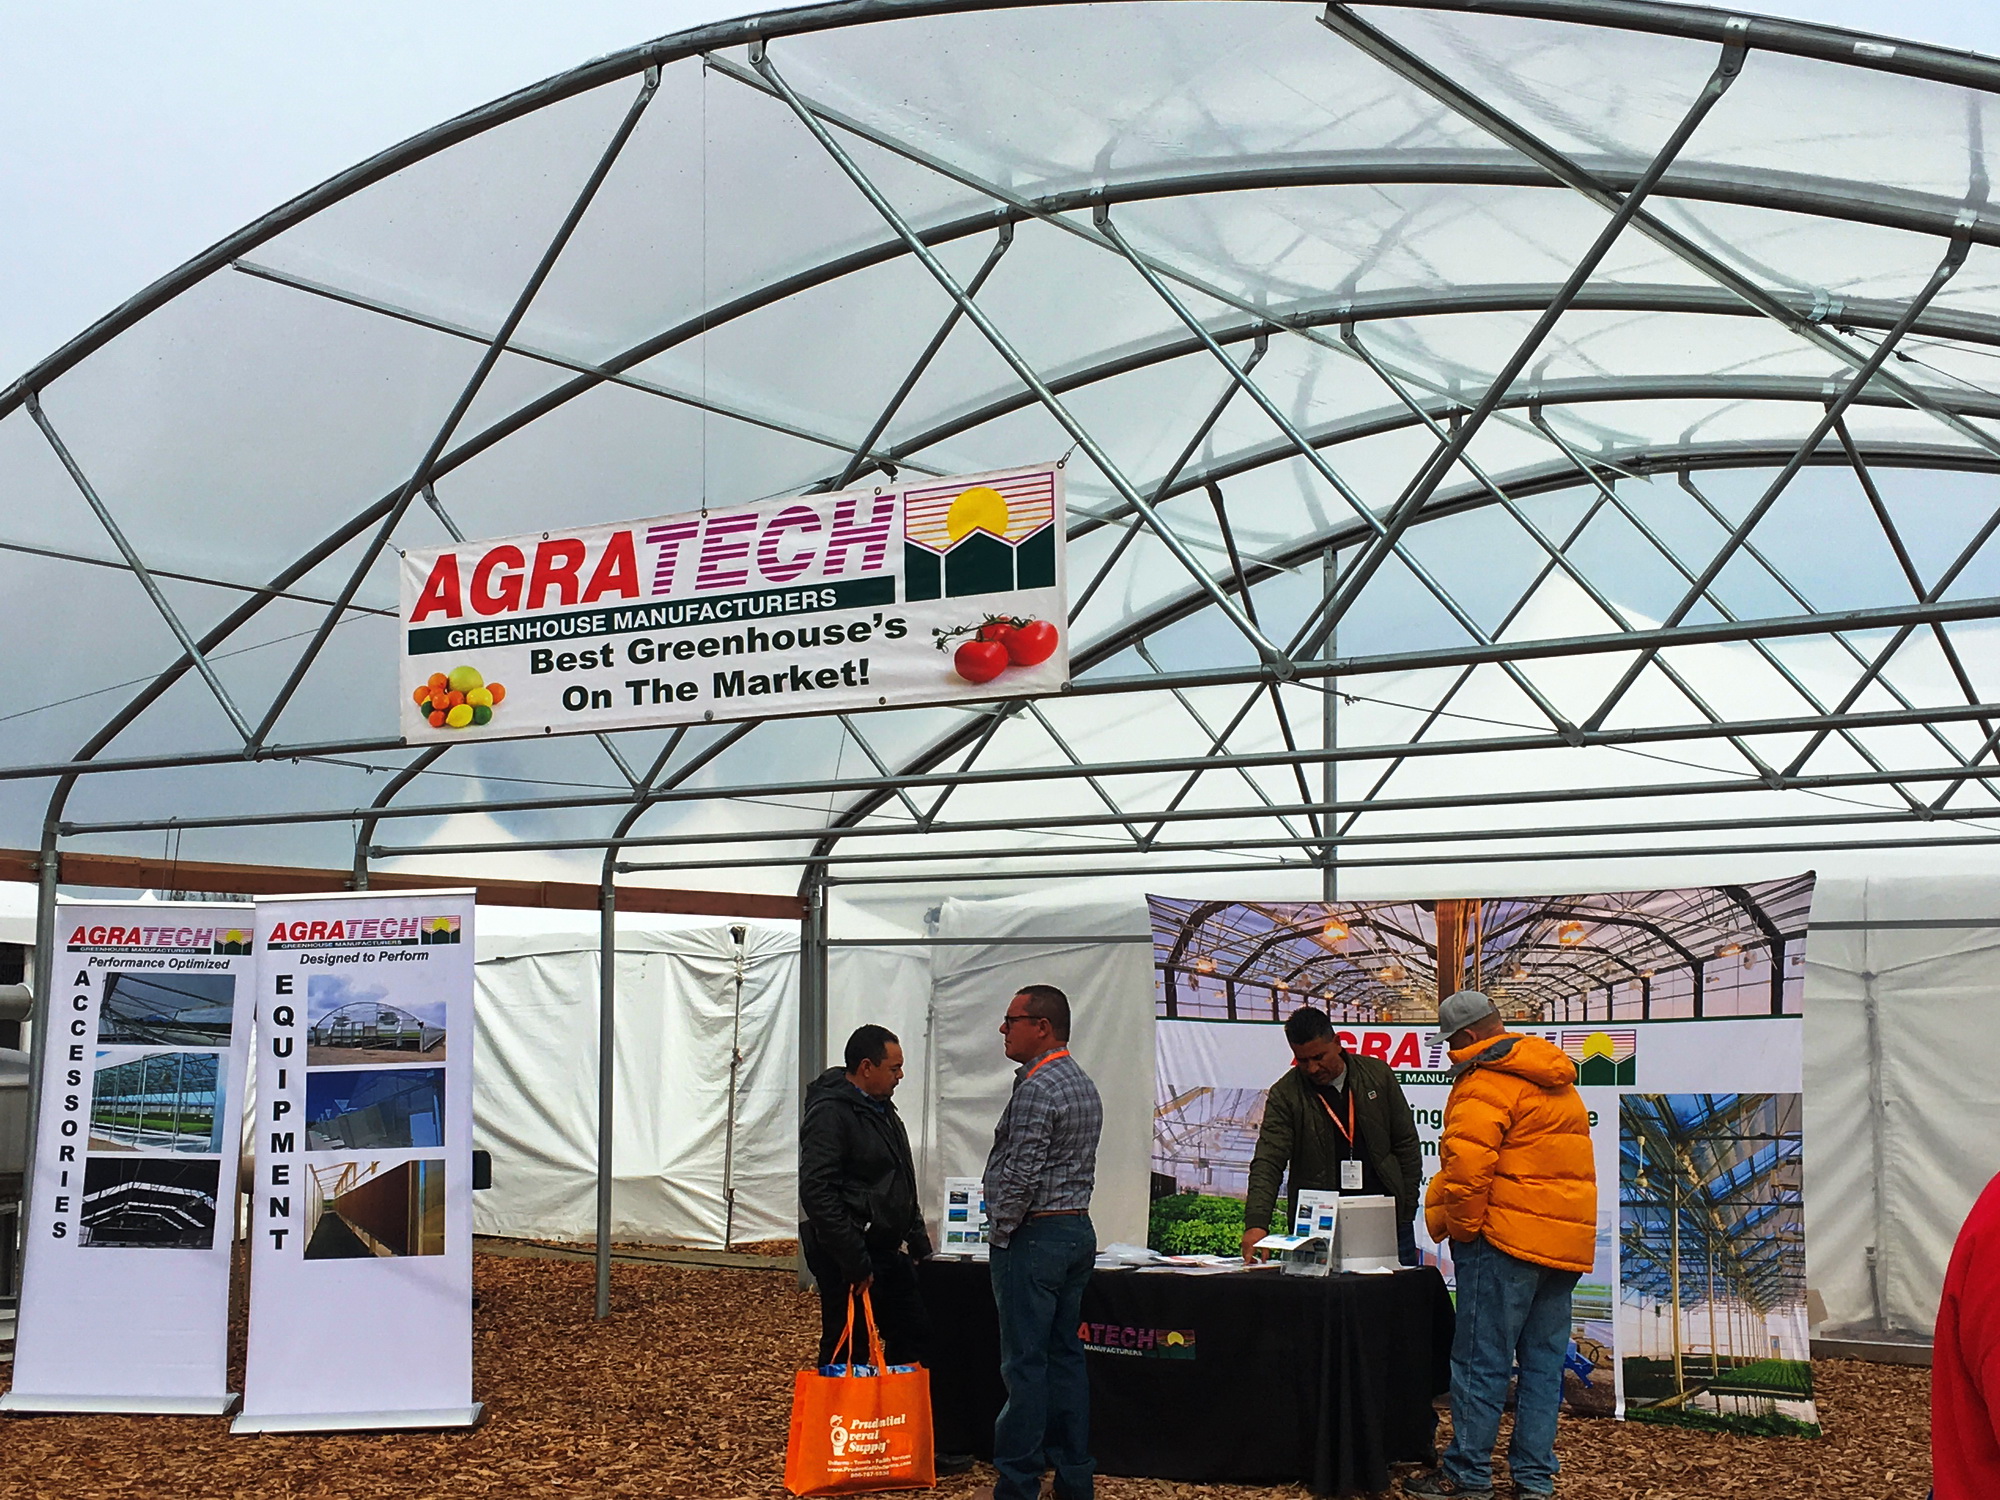 2022 World Ag Expo in Tulare, CA. | Commercial Greerhouse Manufacturer